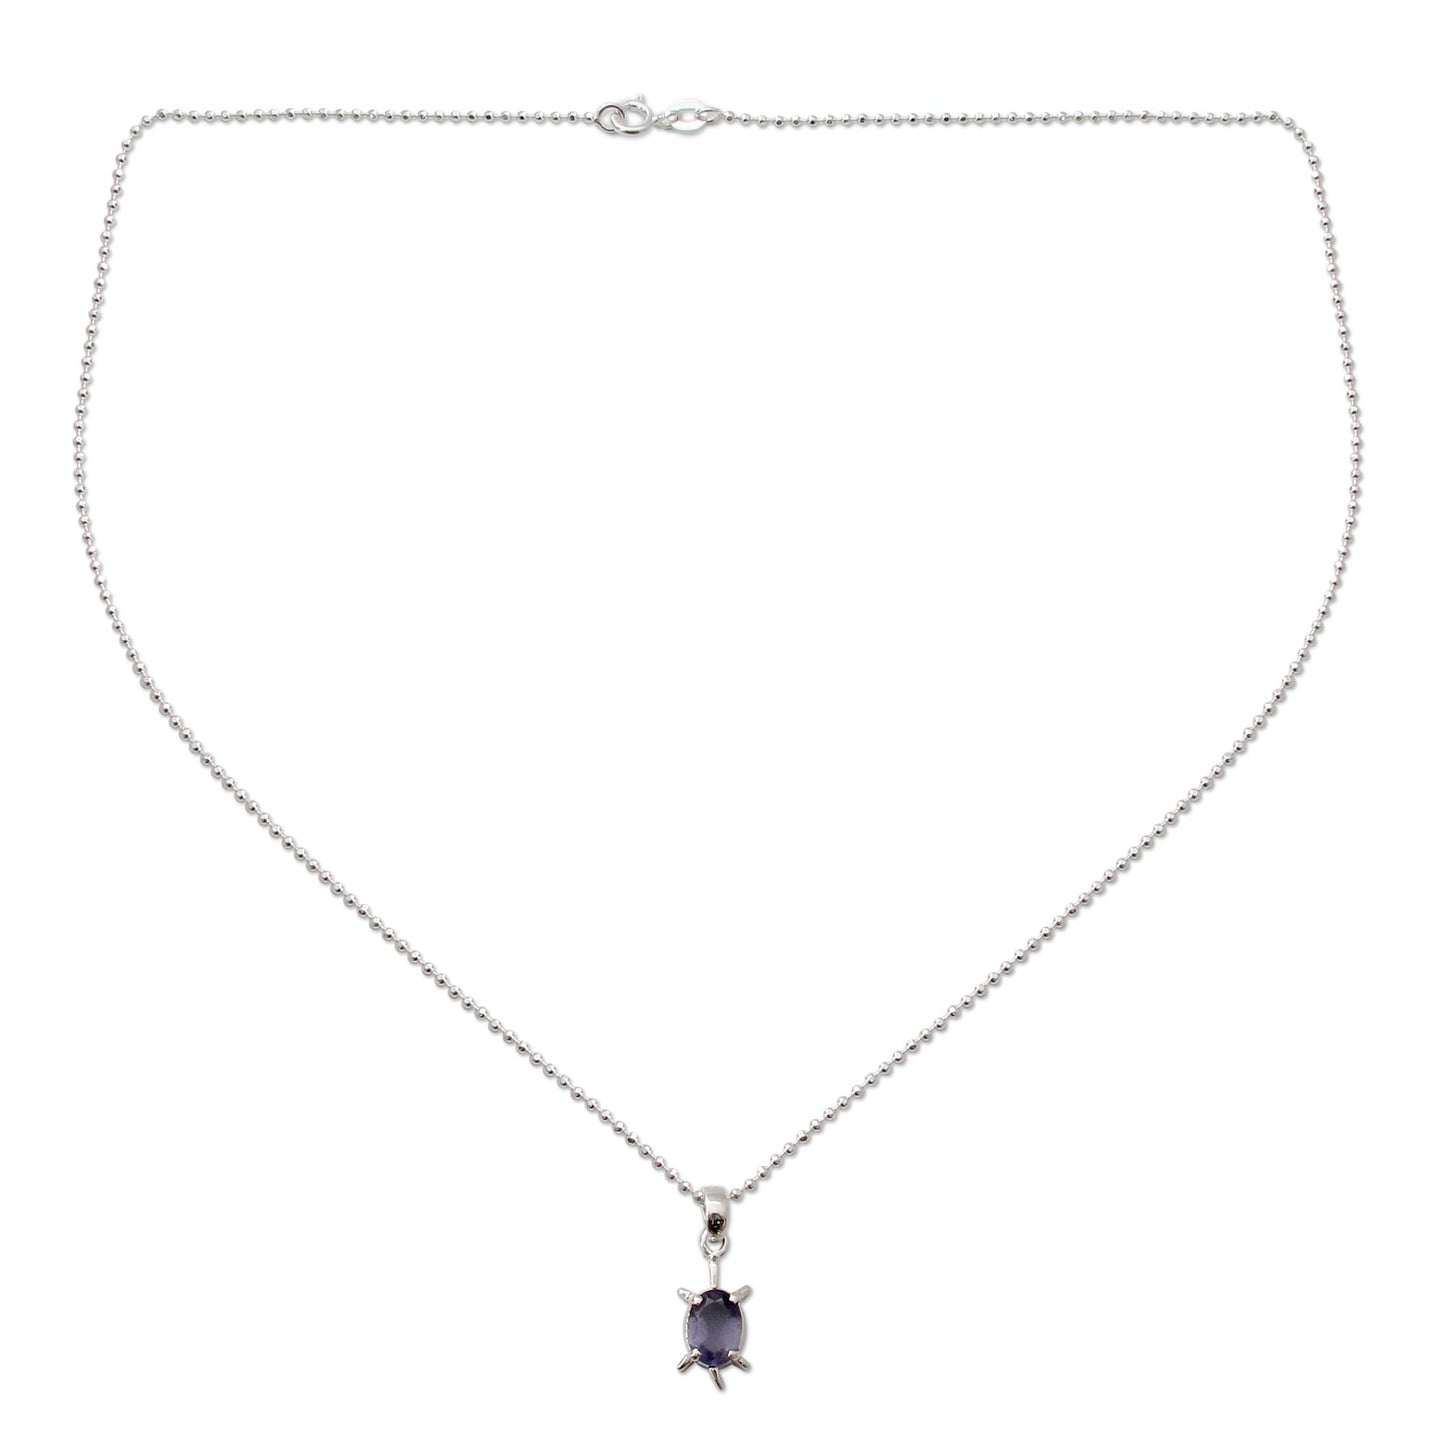 Crystal Turtle Handcrafted Sterling Silver and Iolite Pendant Necklace